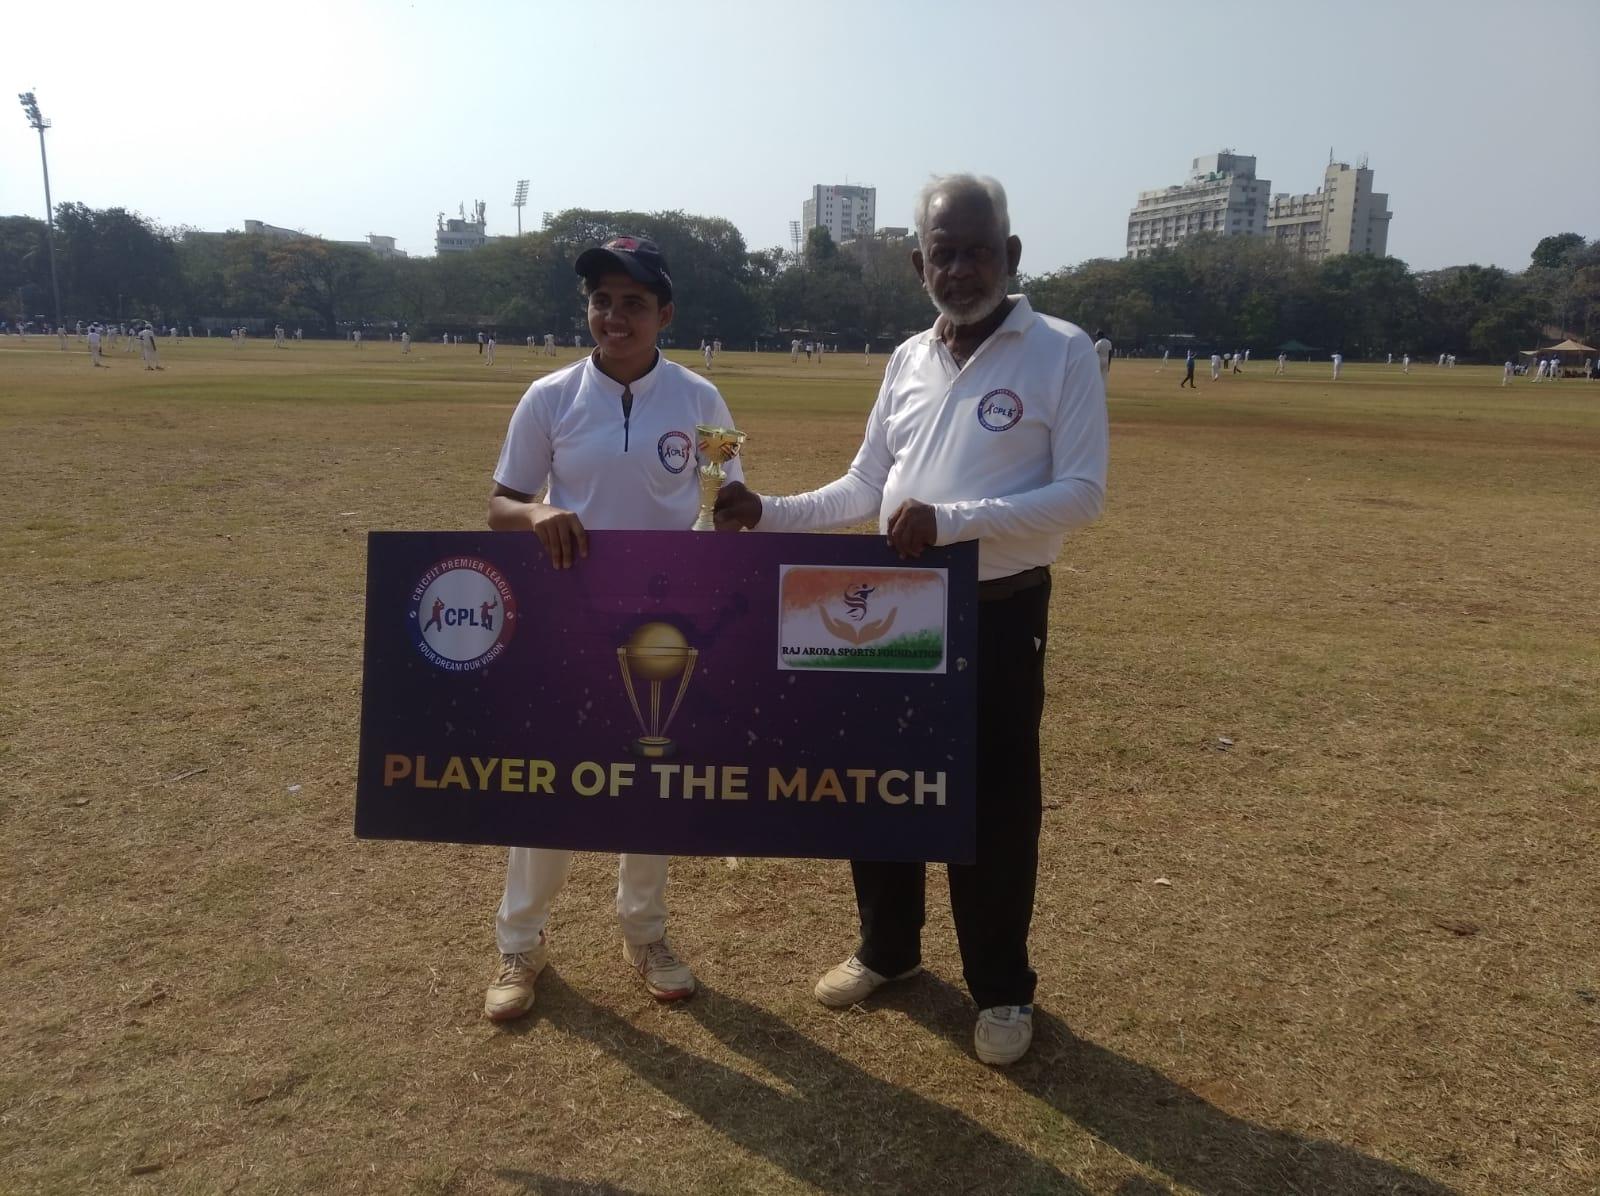 Mansi patil player of the match she’s scored 85 runs in 86 Balls